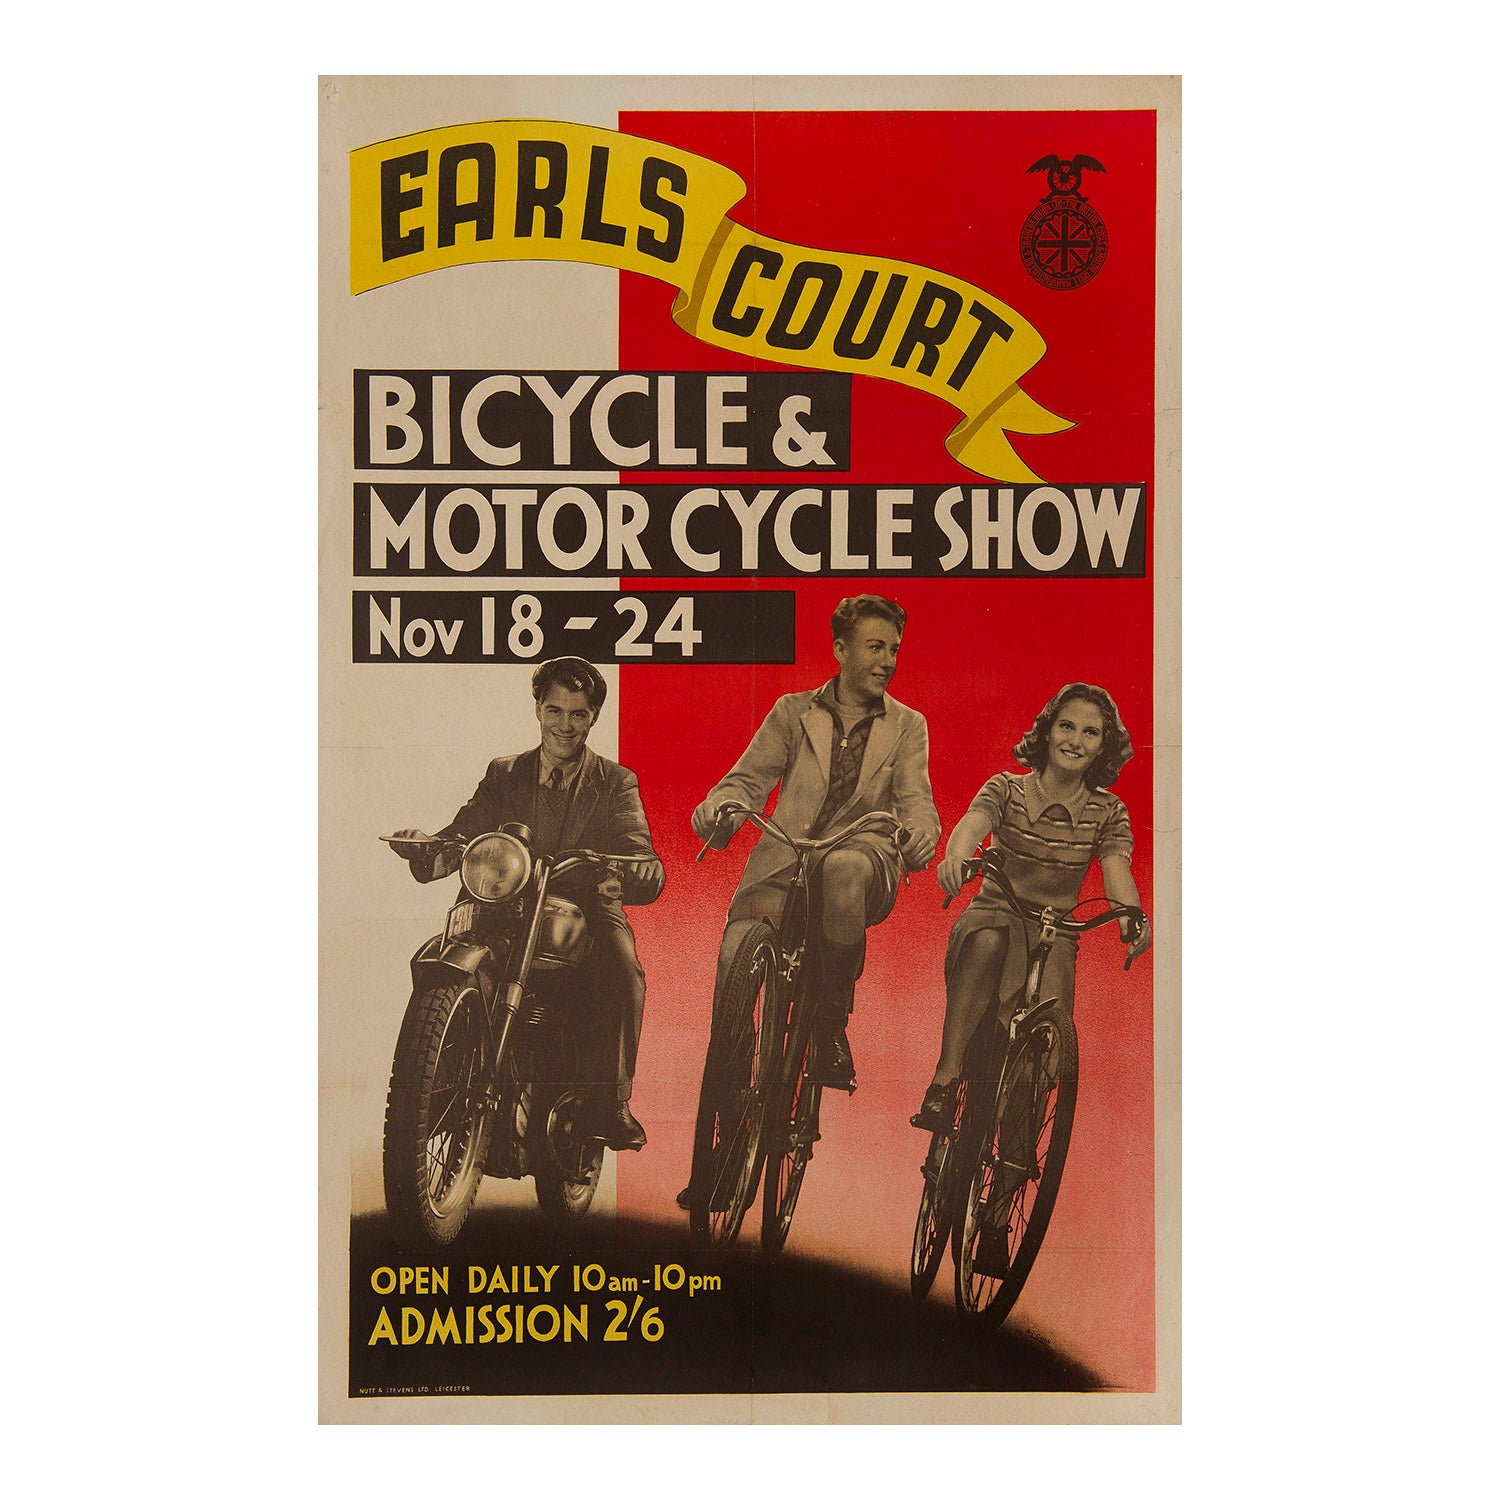 Earls Court. Bicycle & Motor Cycle Show